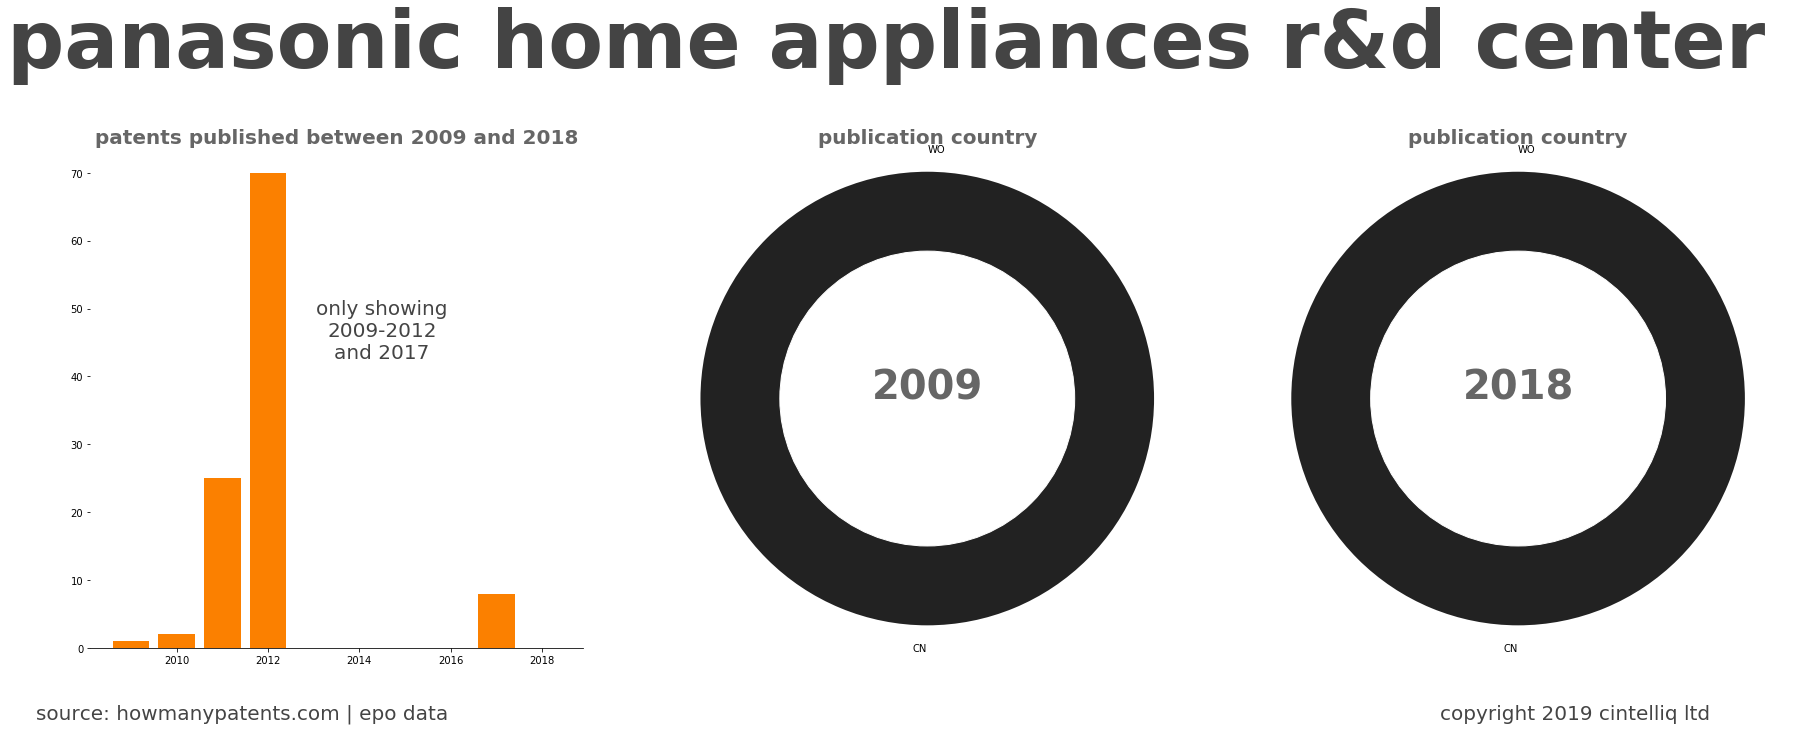 summary of patents for Panasonic Home Appliances R&D Center 